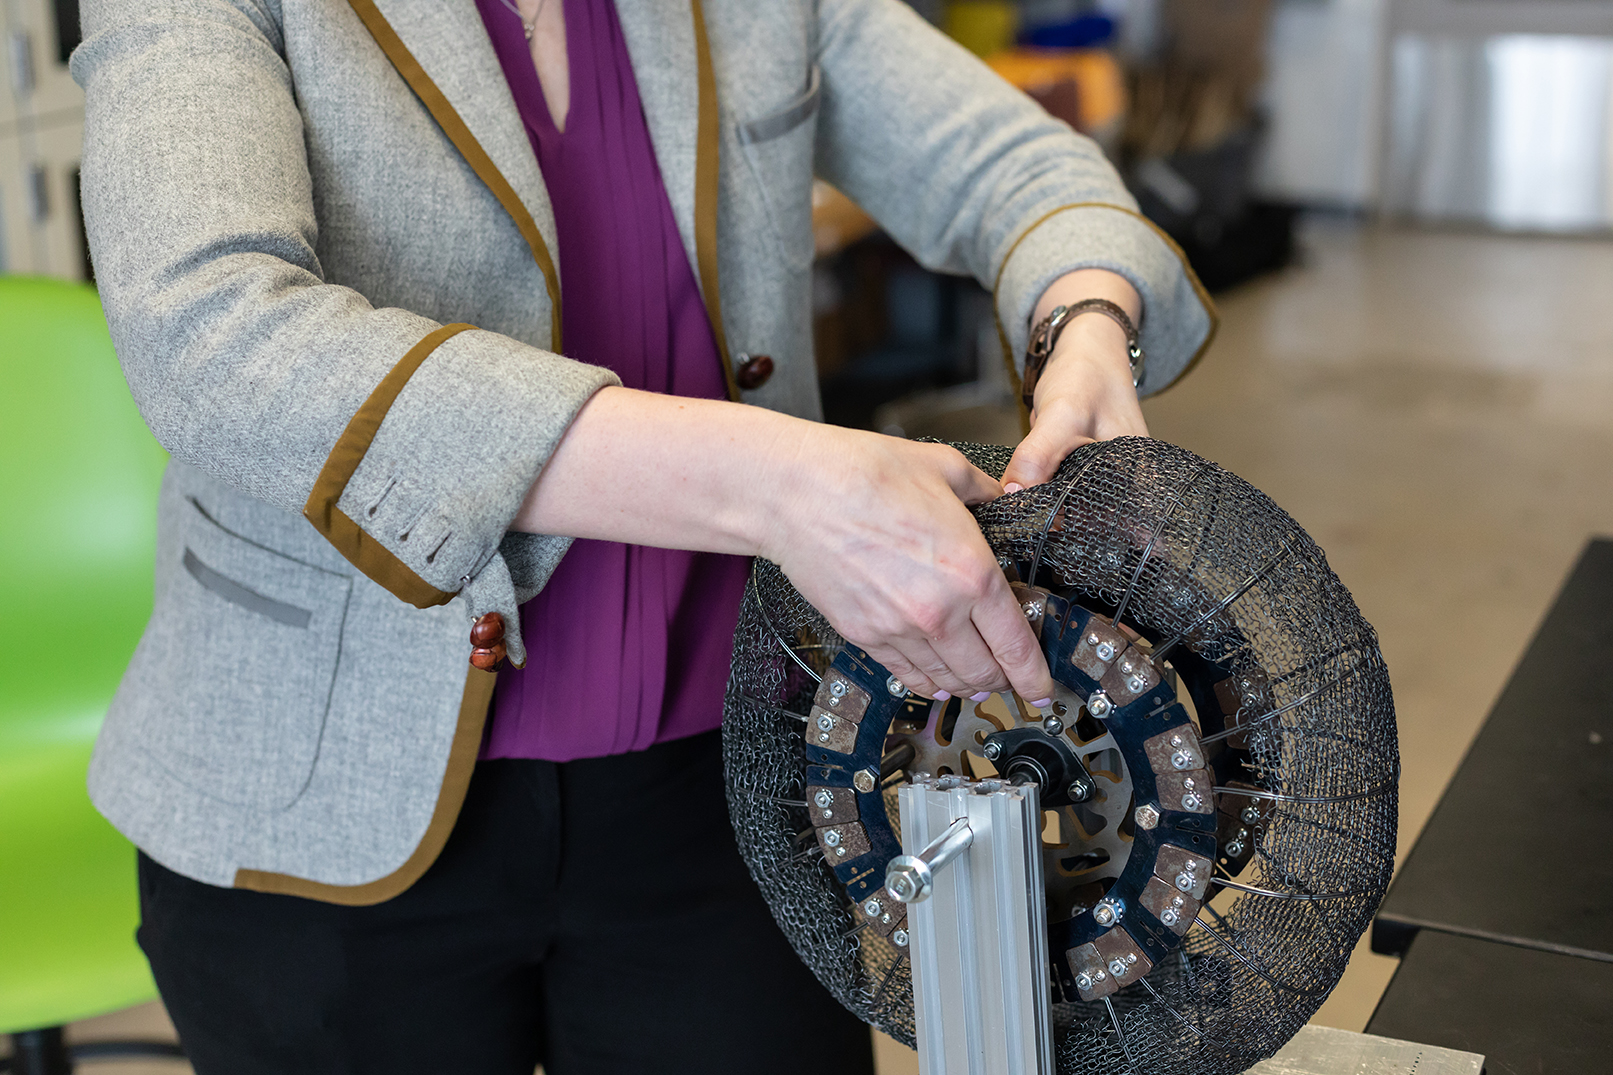 A woman's hands pressing into a tire made of wire.